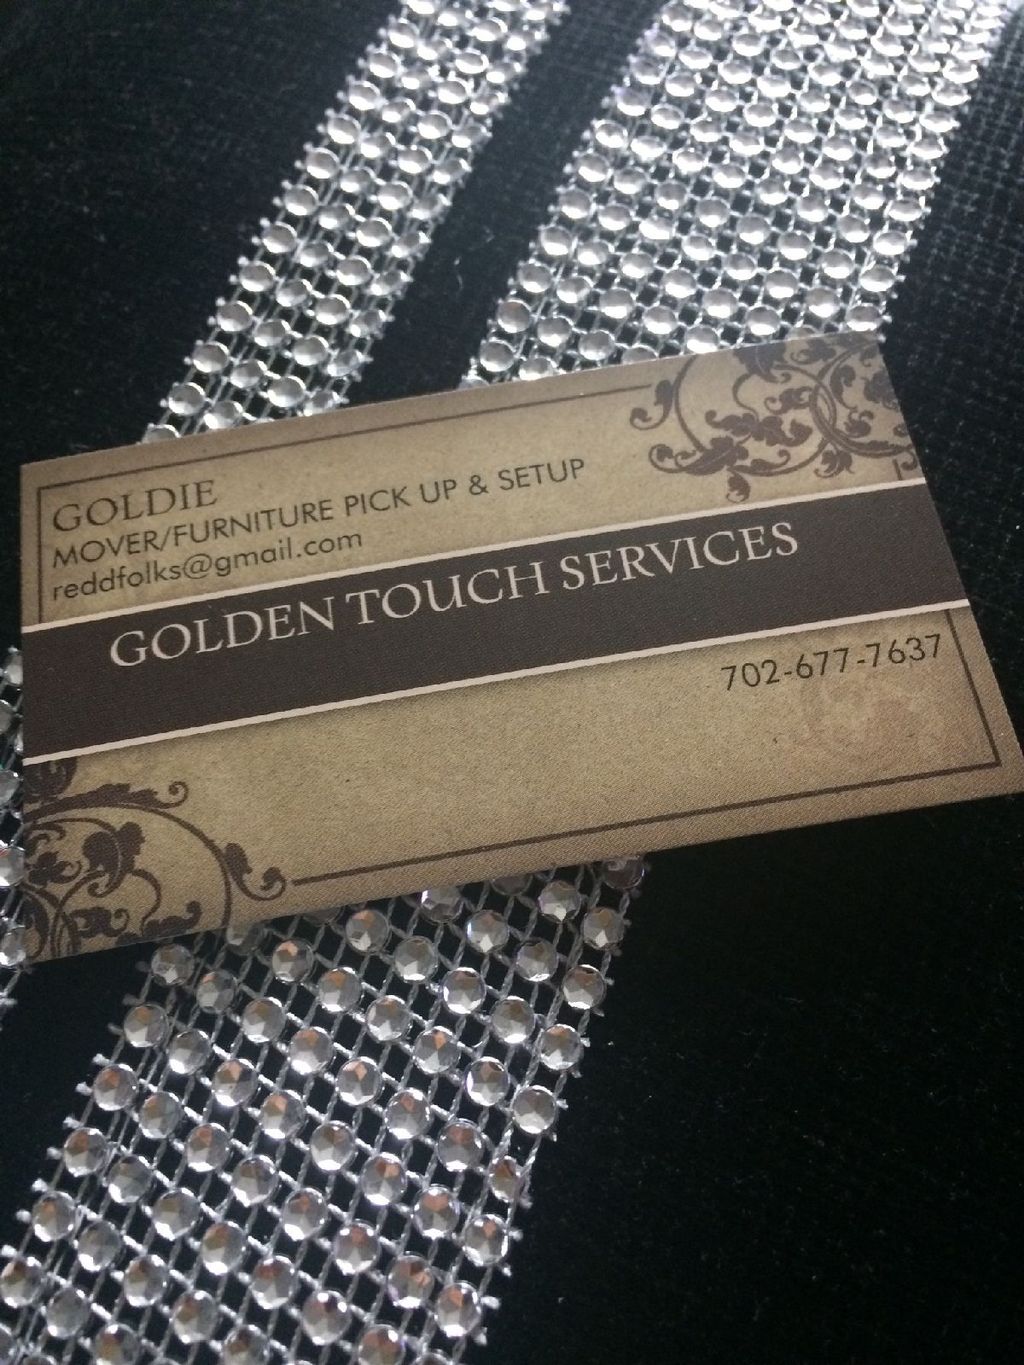 GOLDEN TOUCH SERVICES